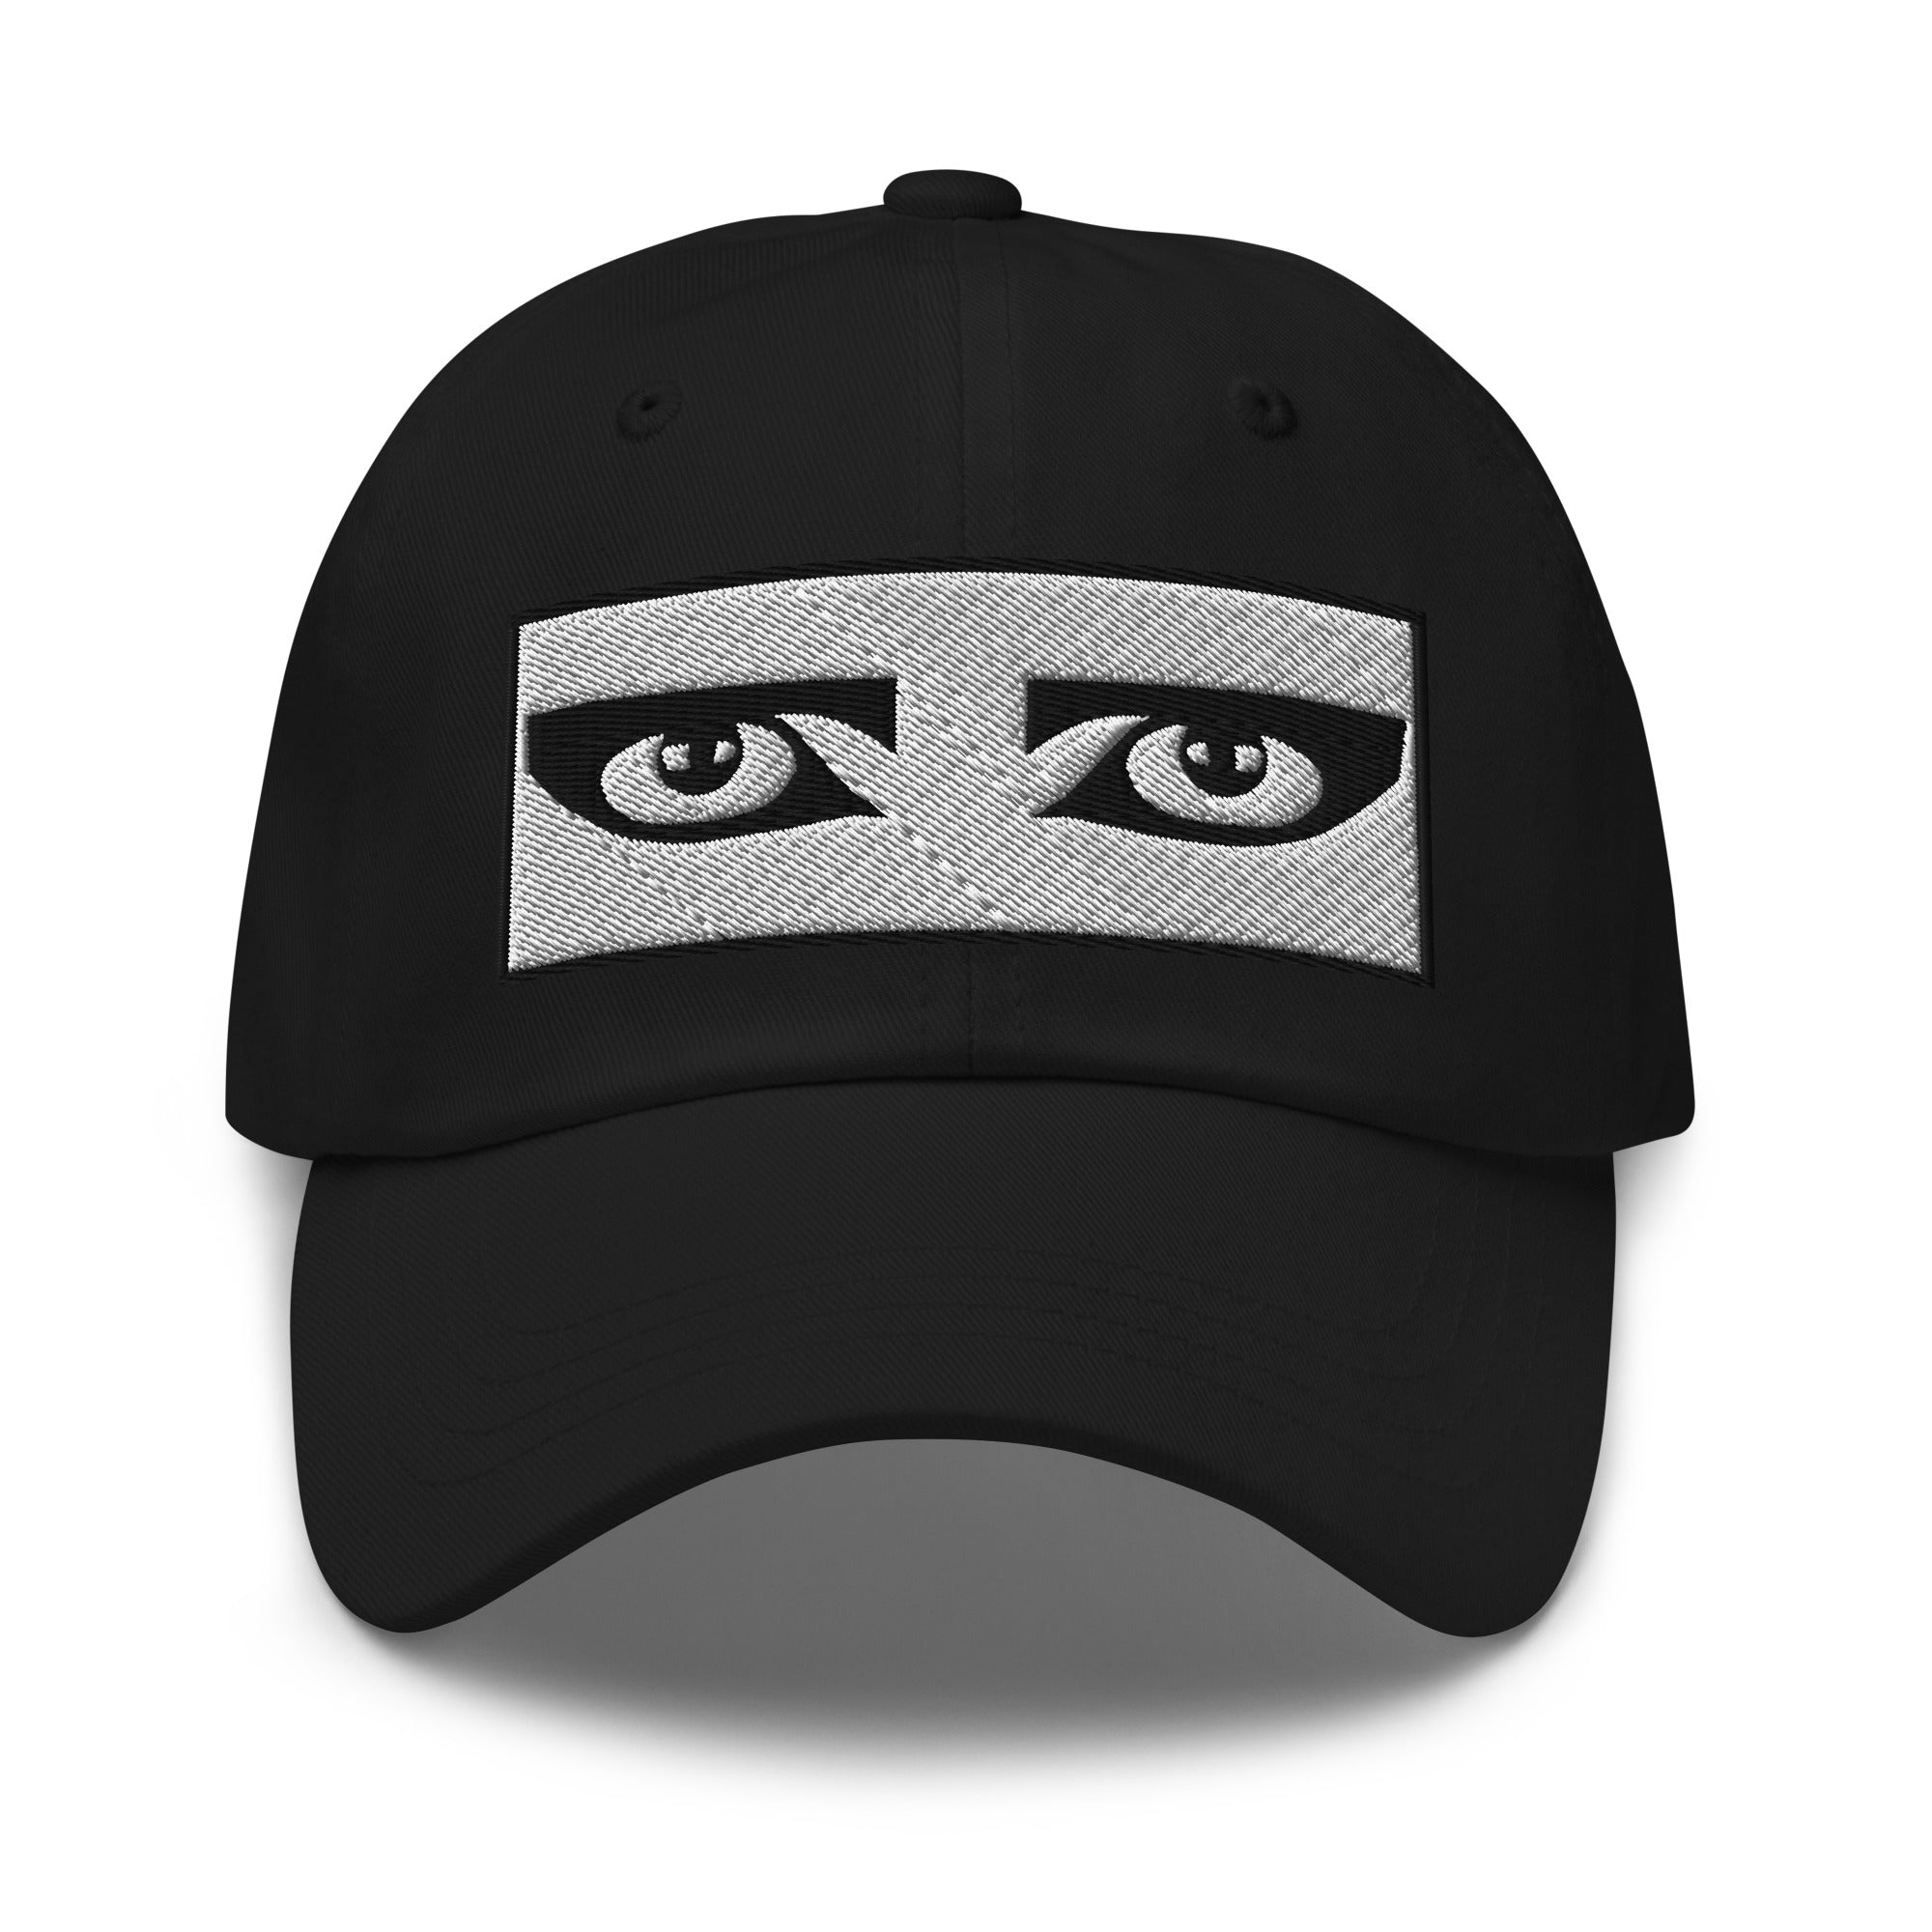 Goth Eyes Siouxsie and the Banshees Embroidered Baseball Cap Dad hat - Edge of Life Designs